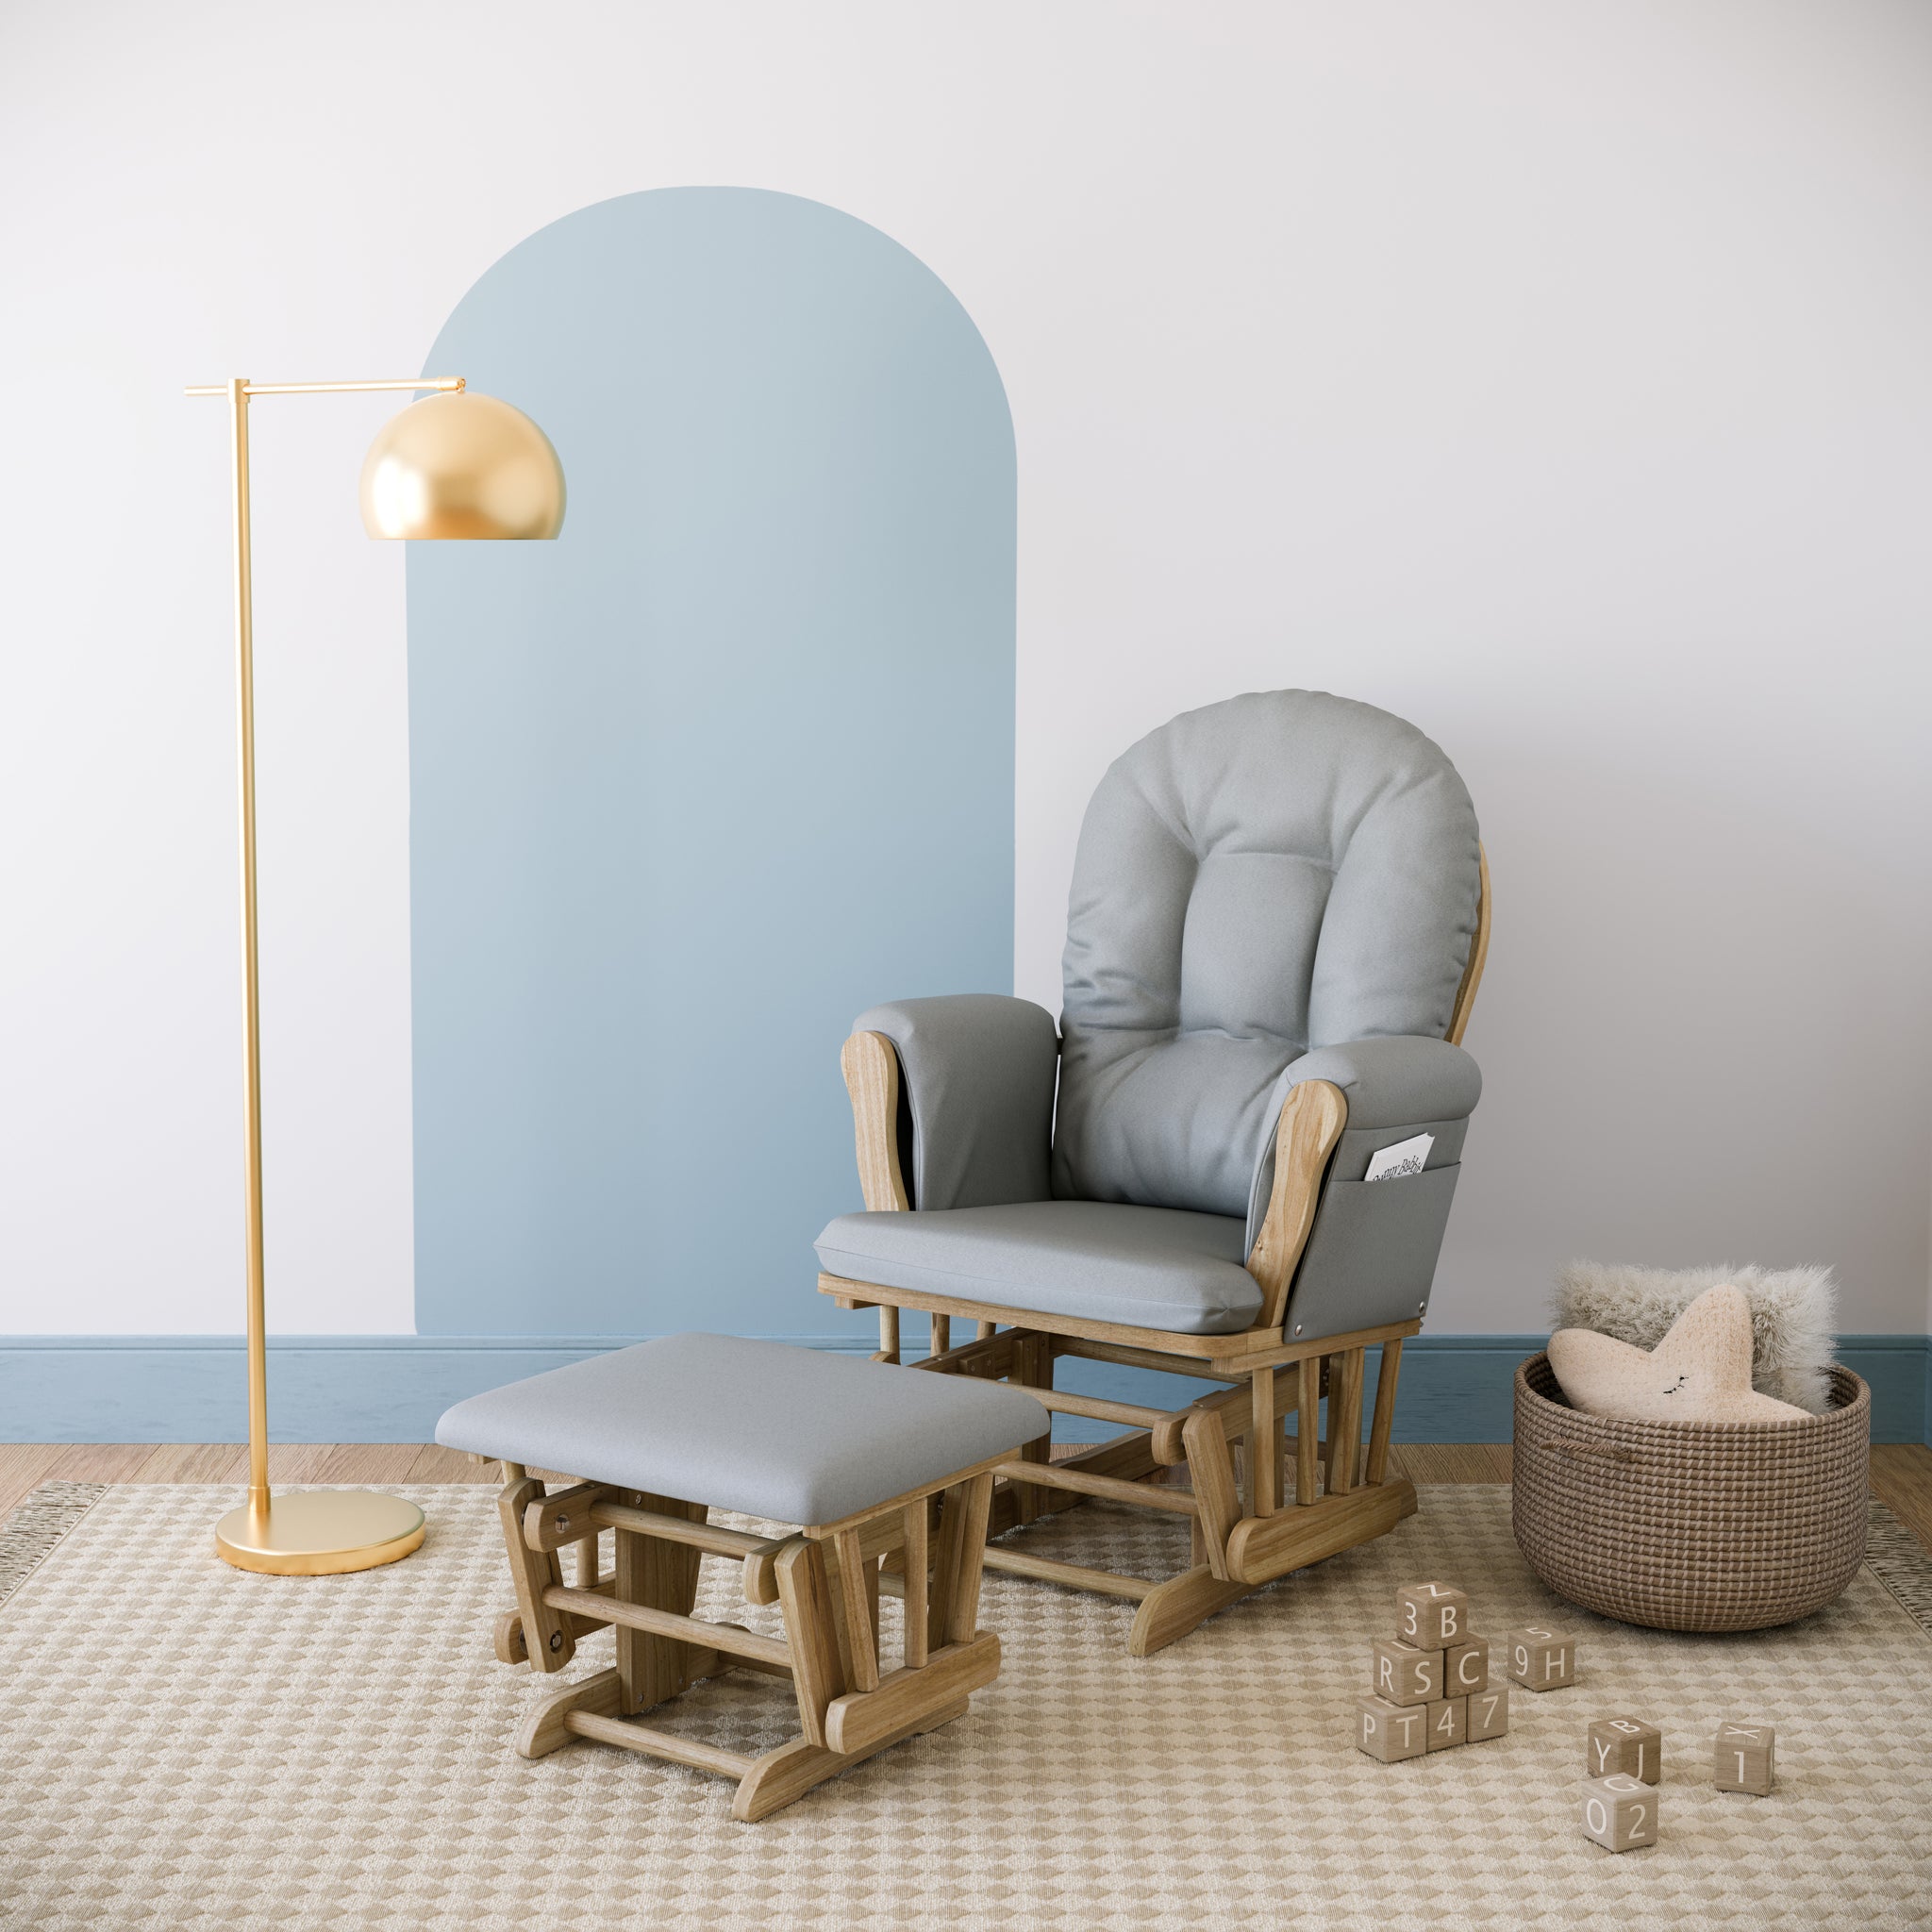 Nursery rocking chair and ottoman in natural wood color with light gray cushions, in bedroom setting against wall with light blue arch shape wallpaper